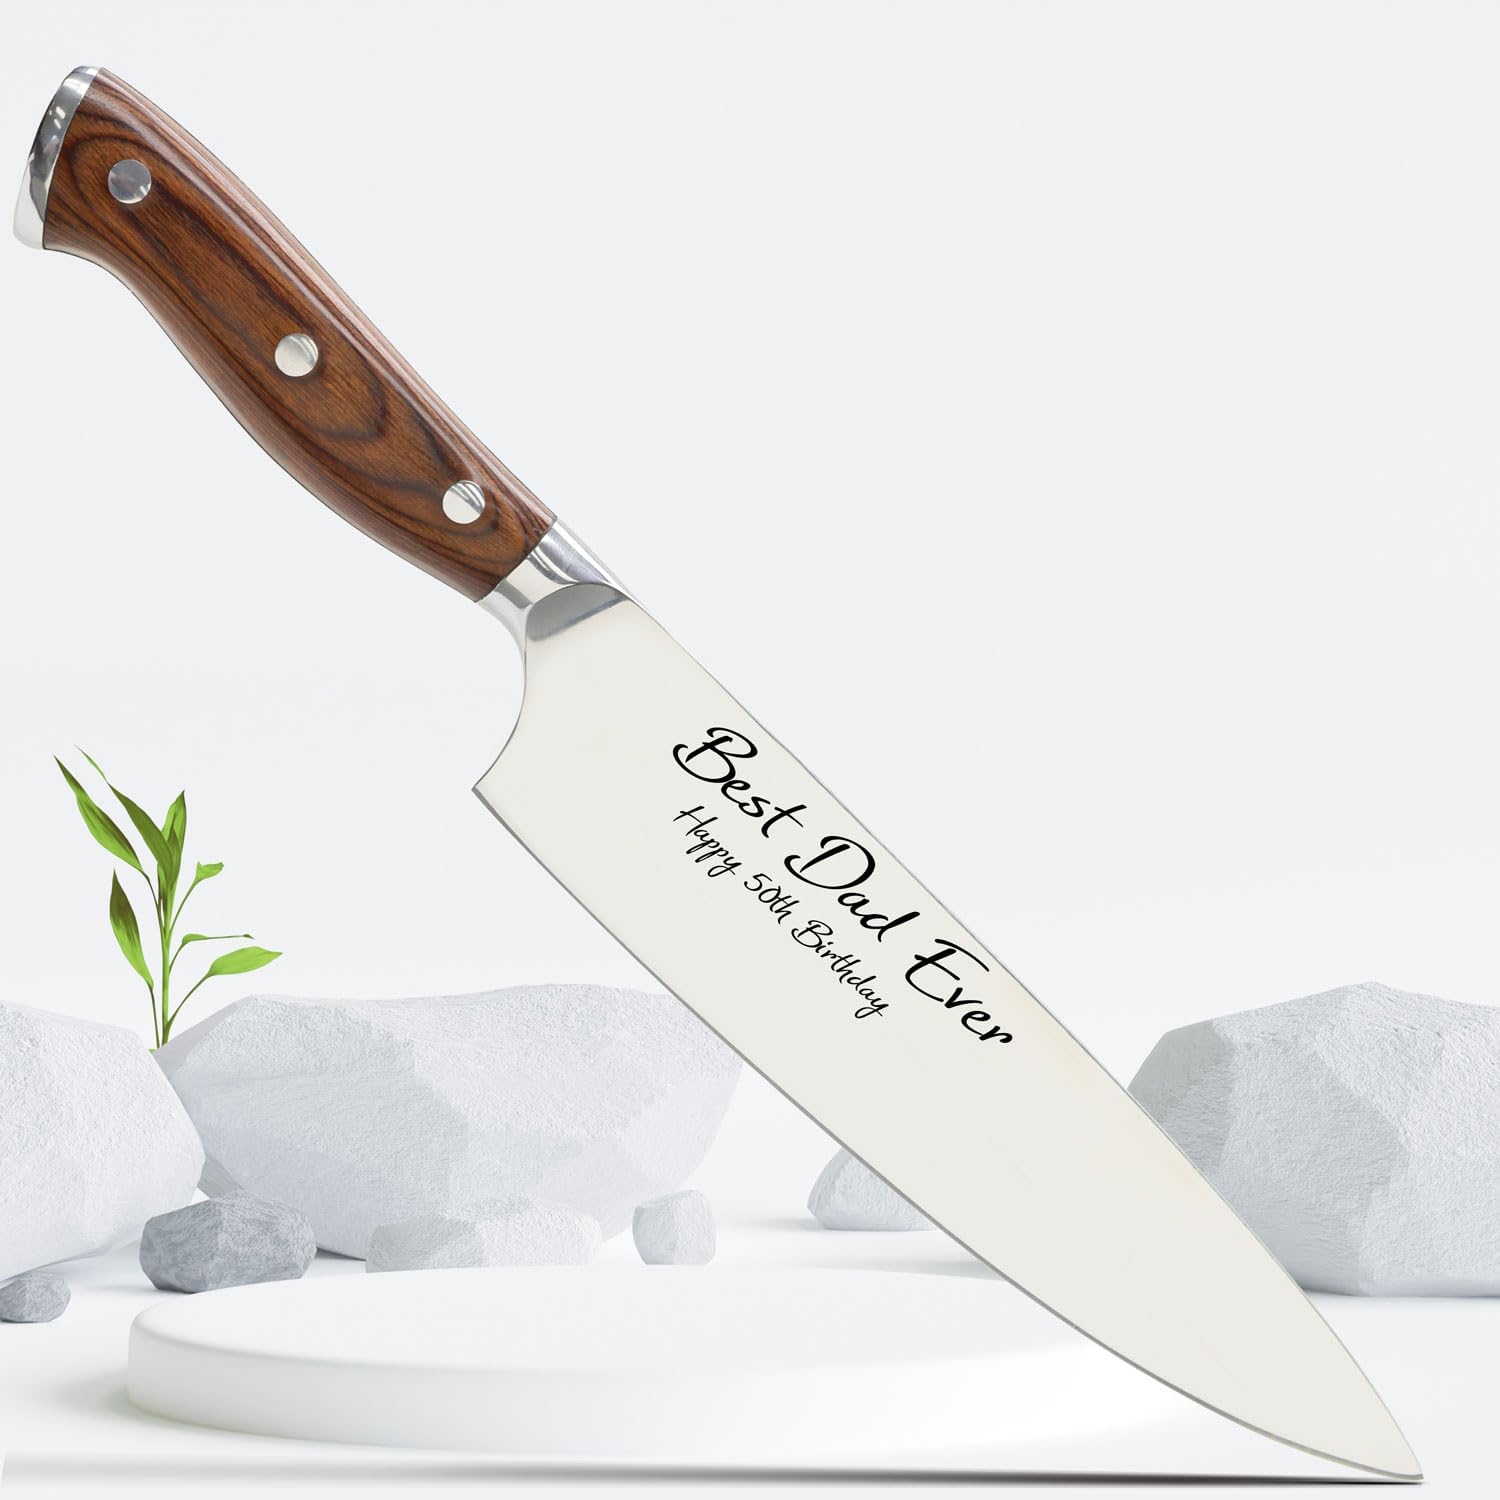 Professional Japanese Knife with Personalization